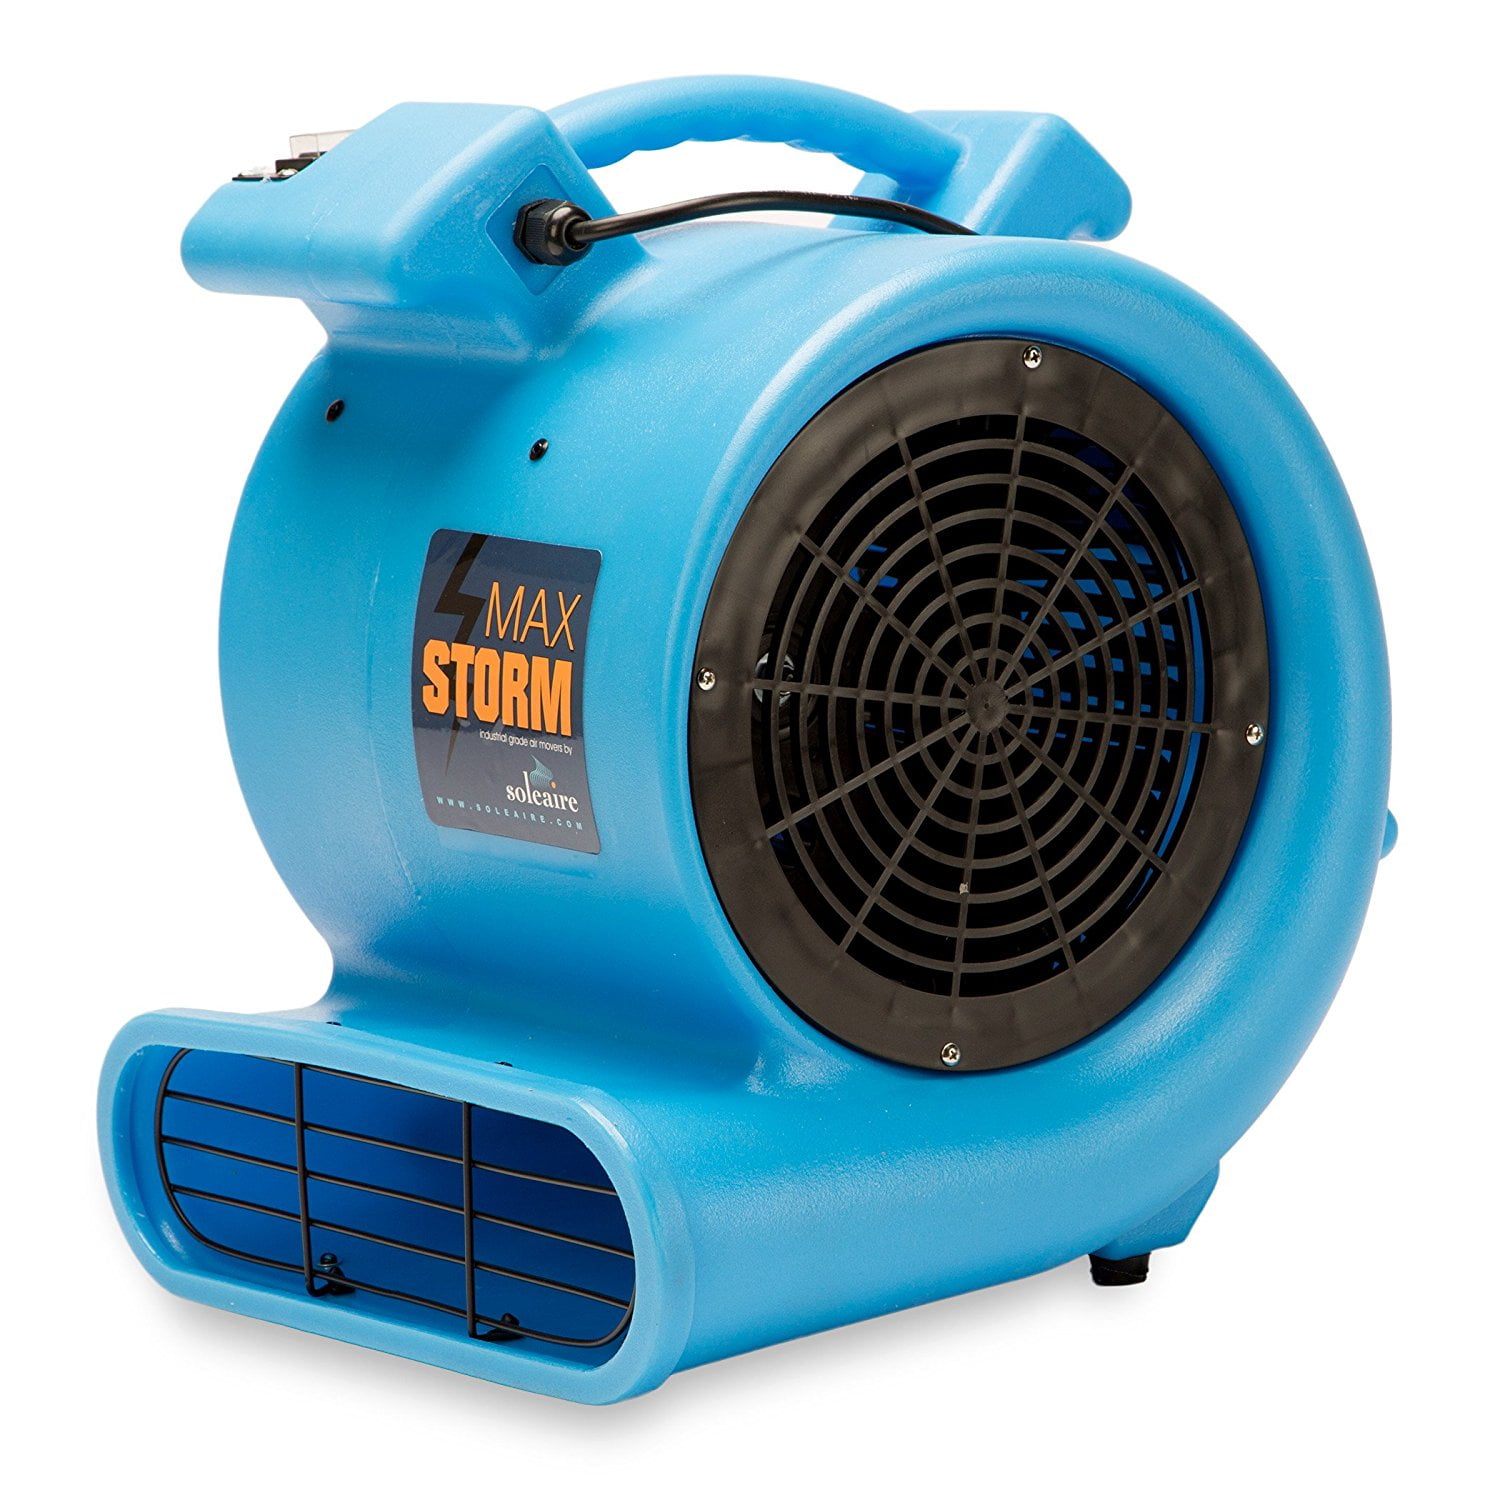 Max Storm 1/2 HP Durable Lightweight Air Mover Carpet Dryer Blower